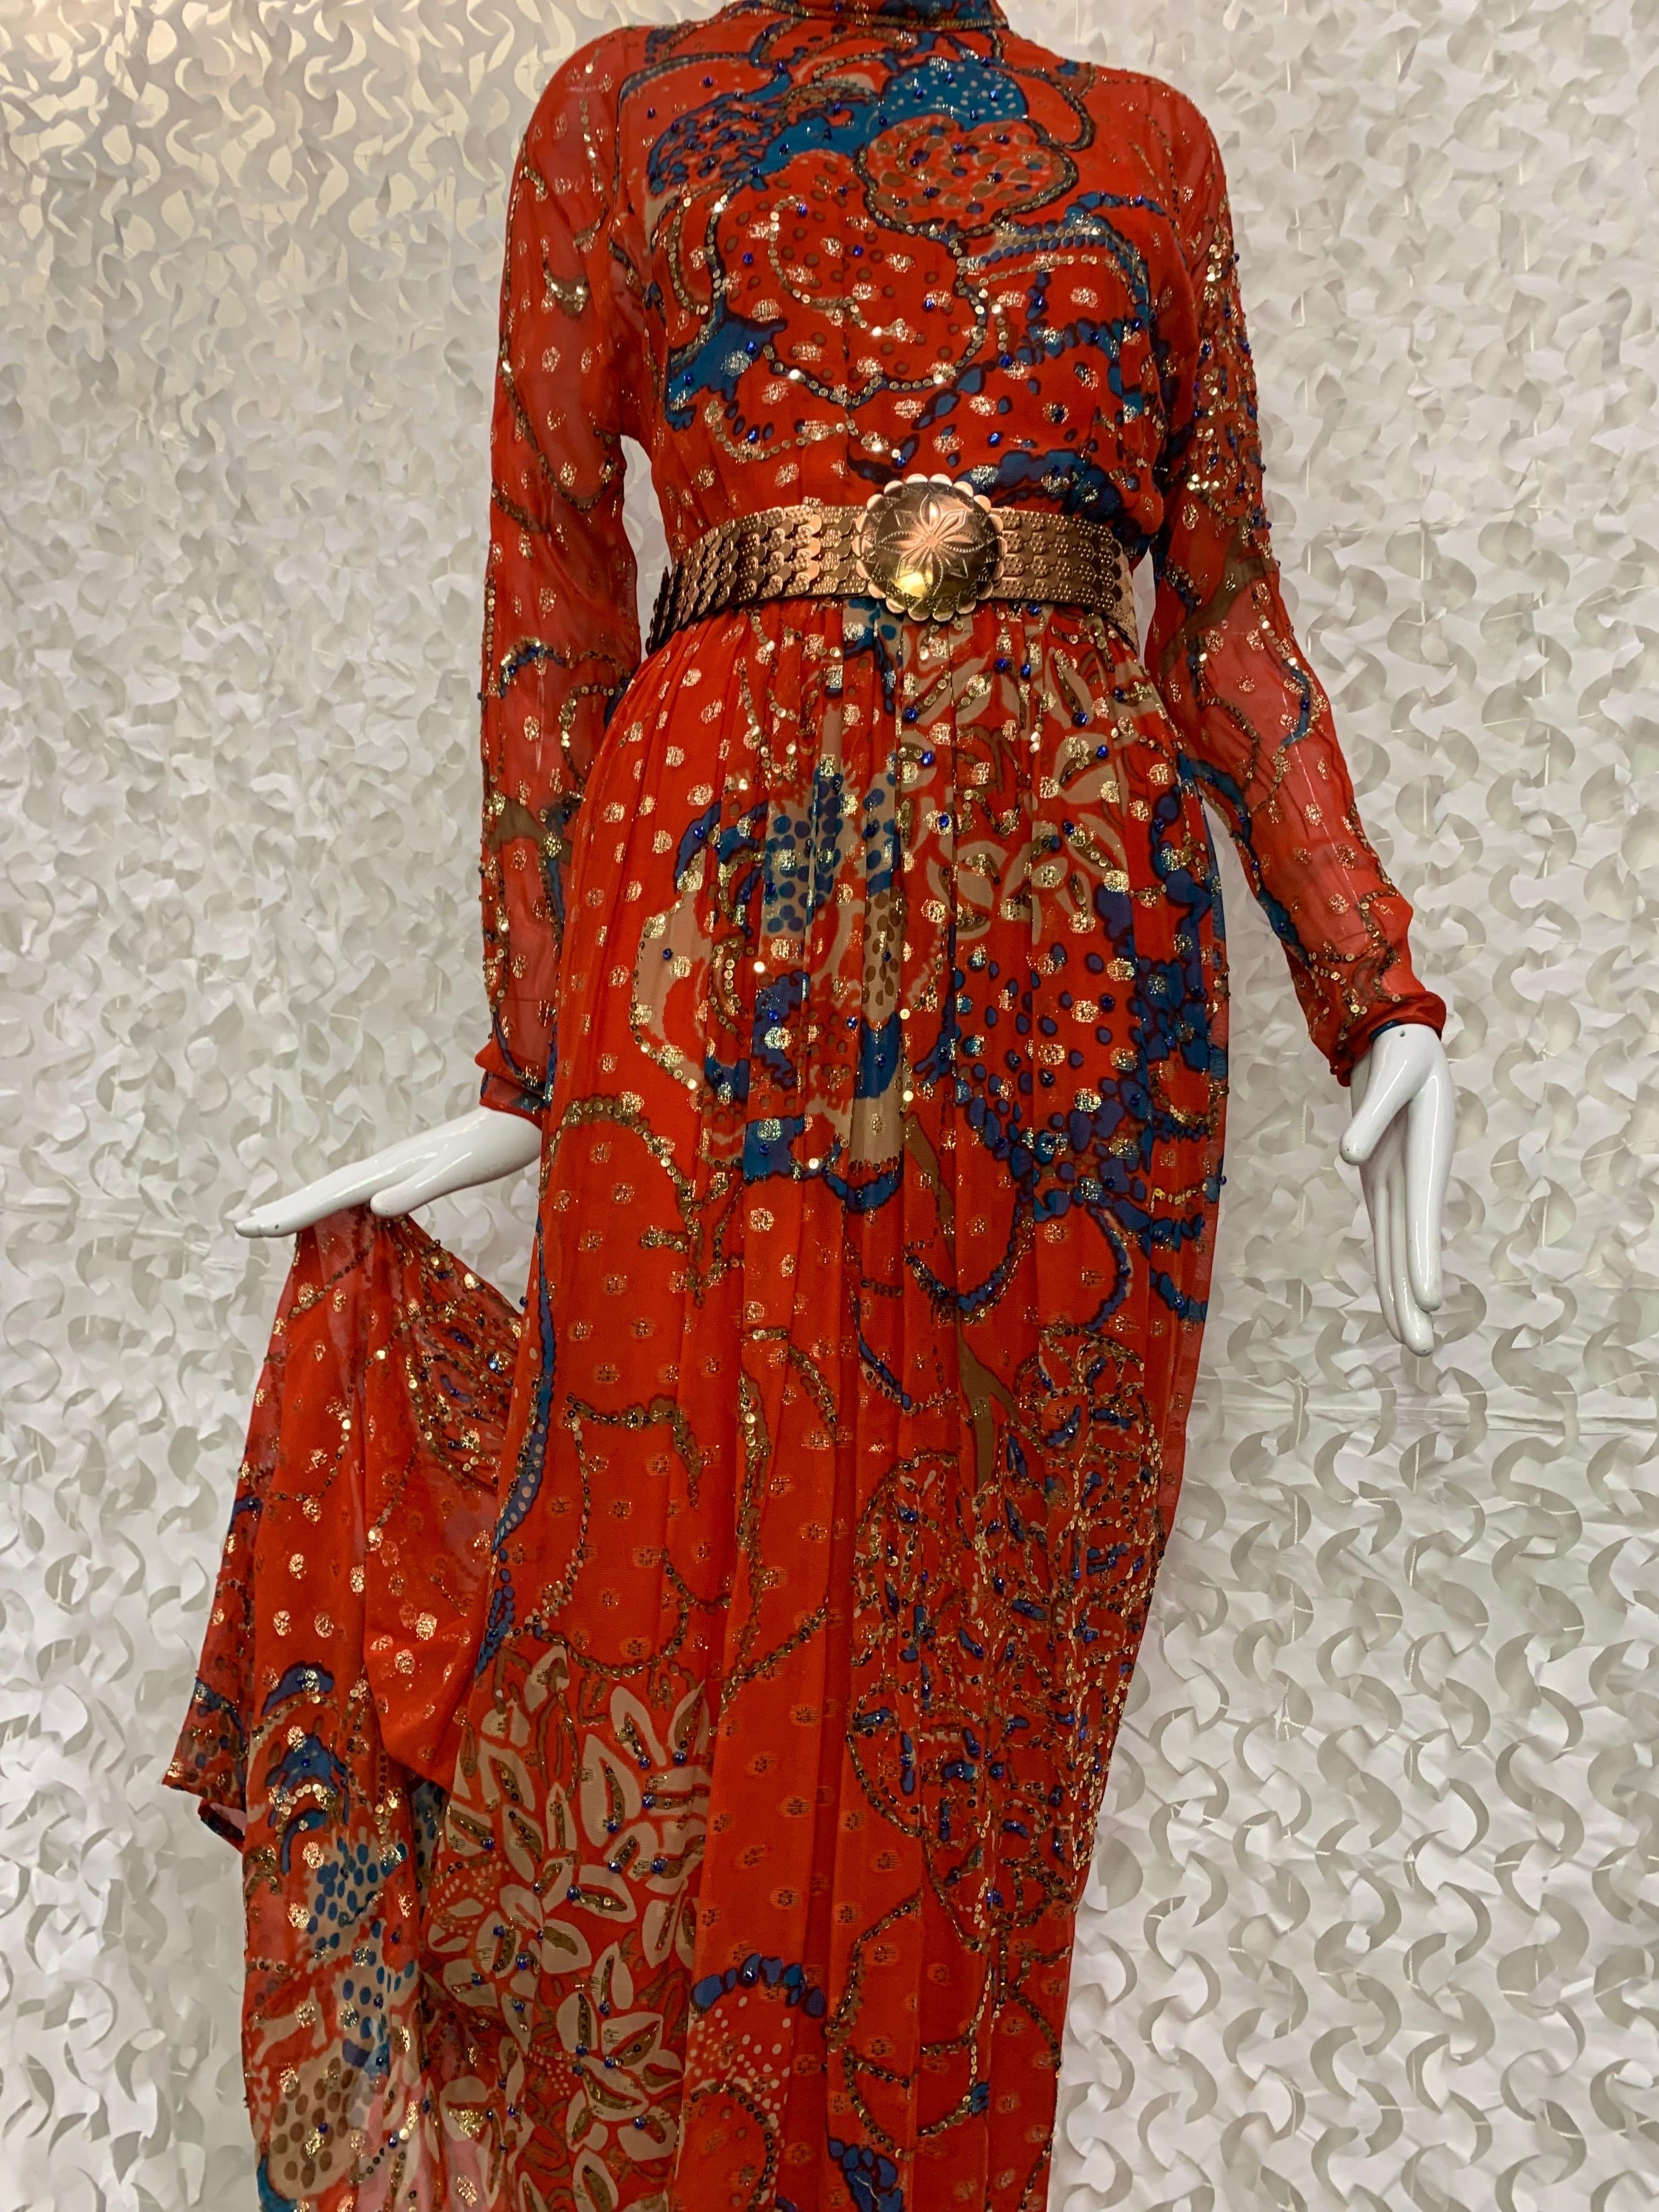 1970s Malcolm Starr Red Silk Chiffon Lame Maxi Dress w Asian-Inspired Floral:  This chic maxi with rolled neckline, sheer sleeves and back is shot through with gold lame dots and the blue branch print is accented with gold sequins. Covered buttons